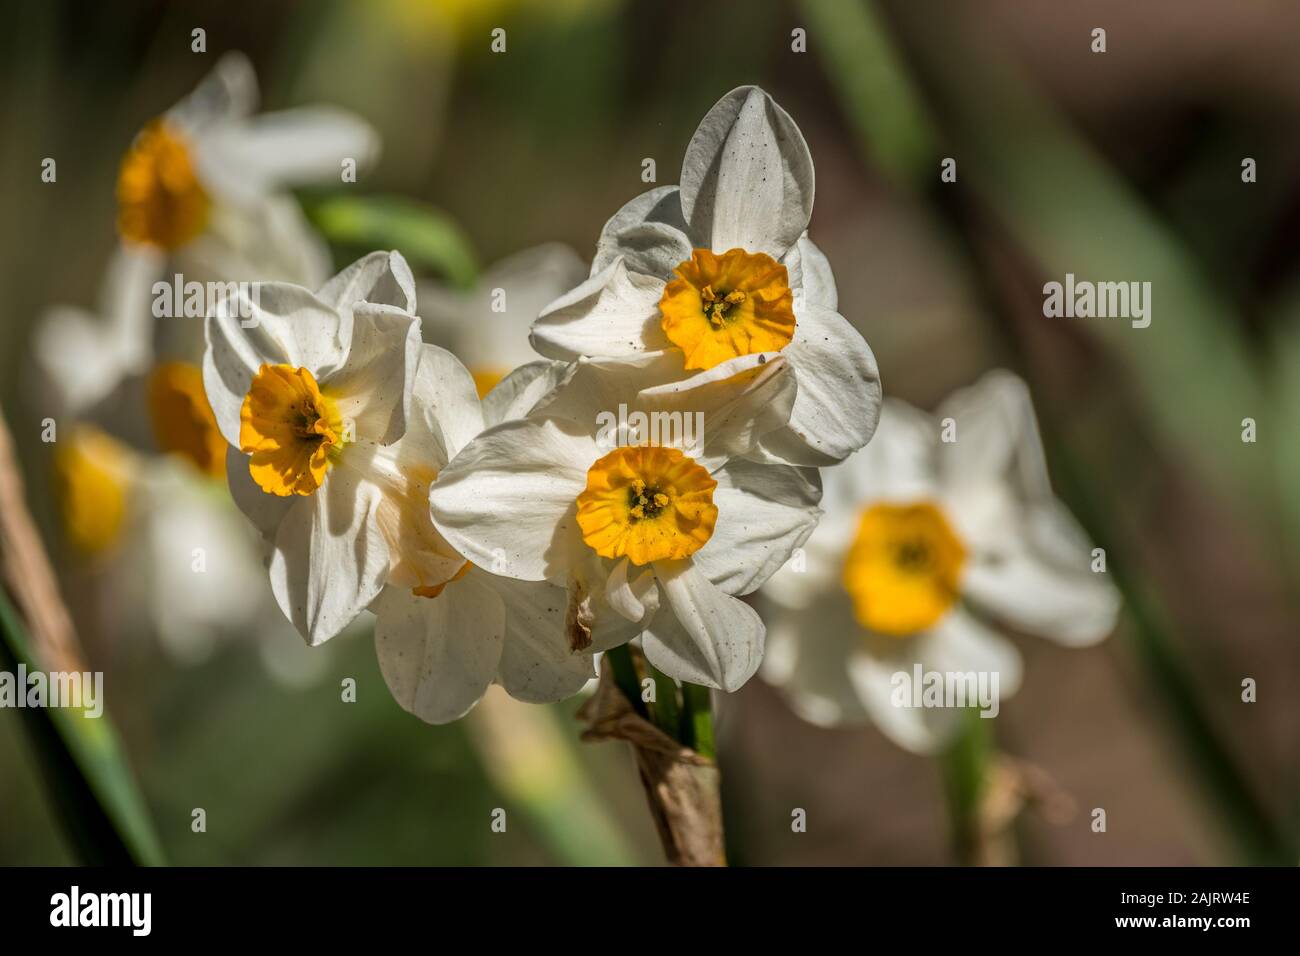 White with a yellow center daffodils clustered together on a sunny day in springtime closeup Stock Photo